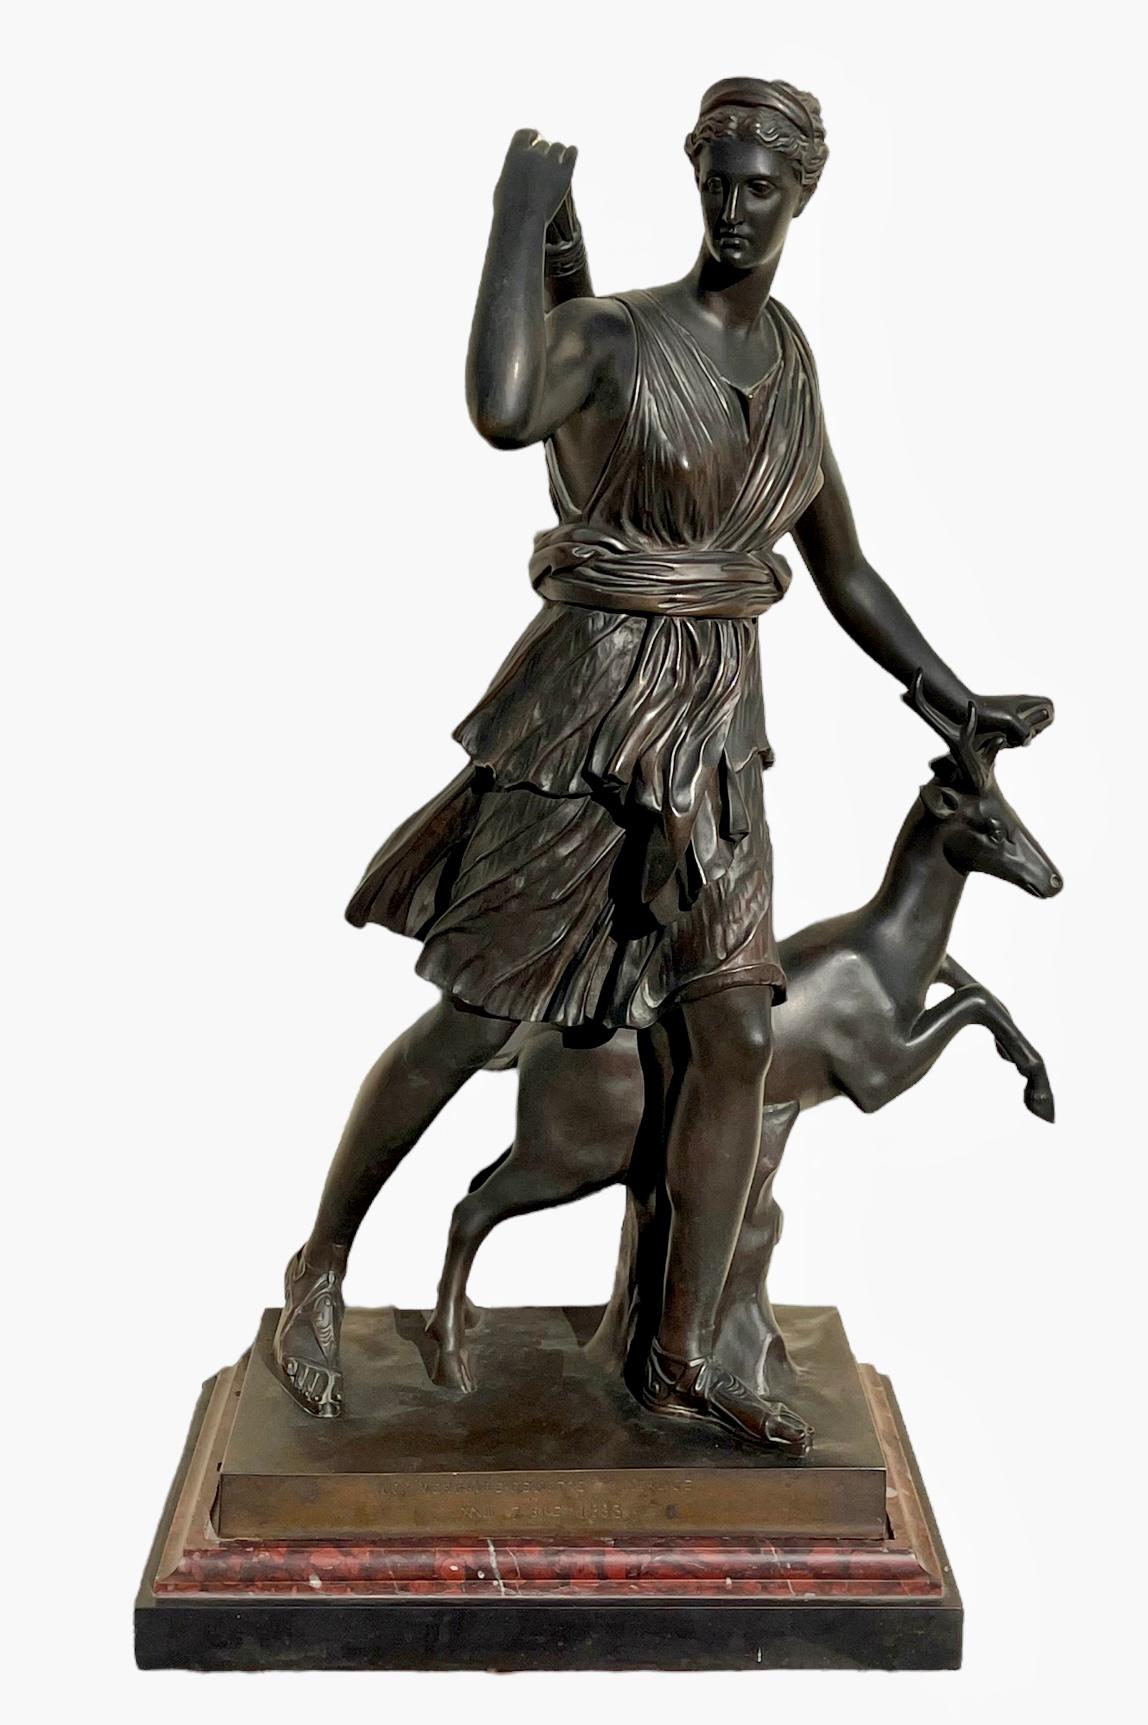 Superb bronze representing Diana with a doe or Diane de Versailles or even Diane the Huntress. It is signed by the founder JABOEUF on the base and dated 1883. This bronze has a brown patina and is in good condition.

Dimensions
Total height